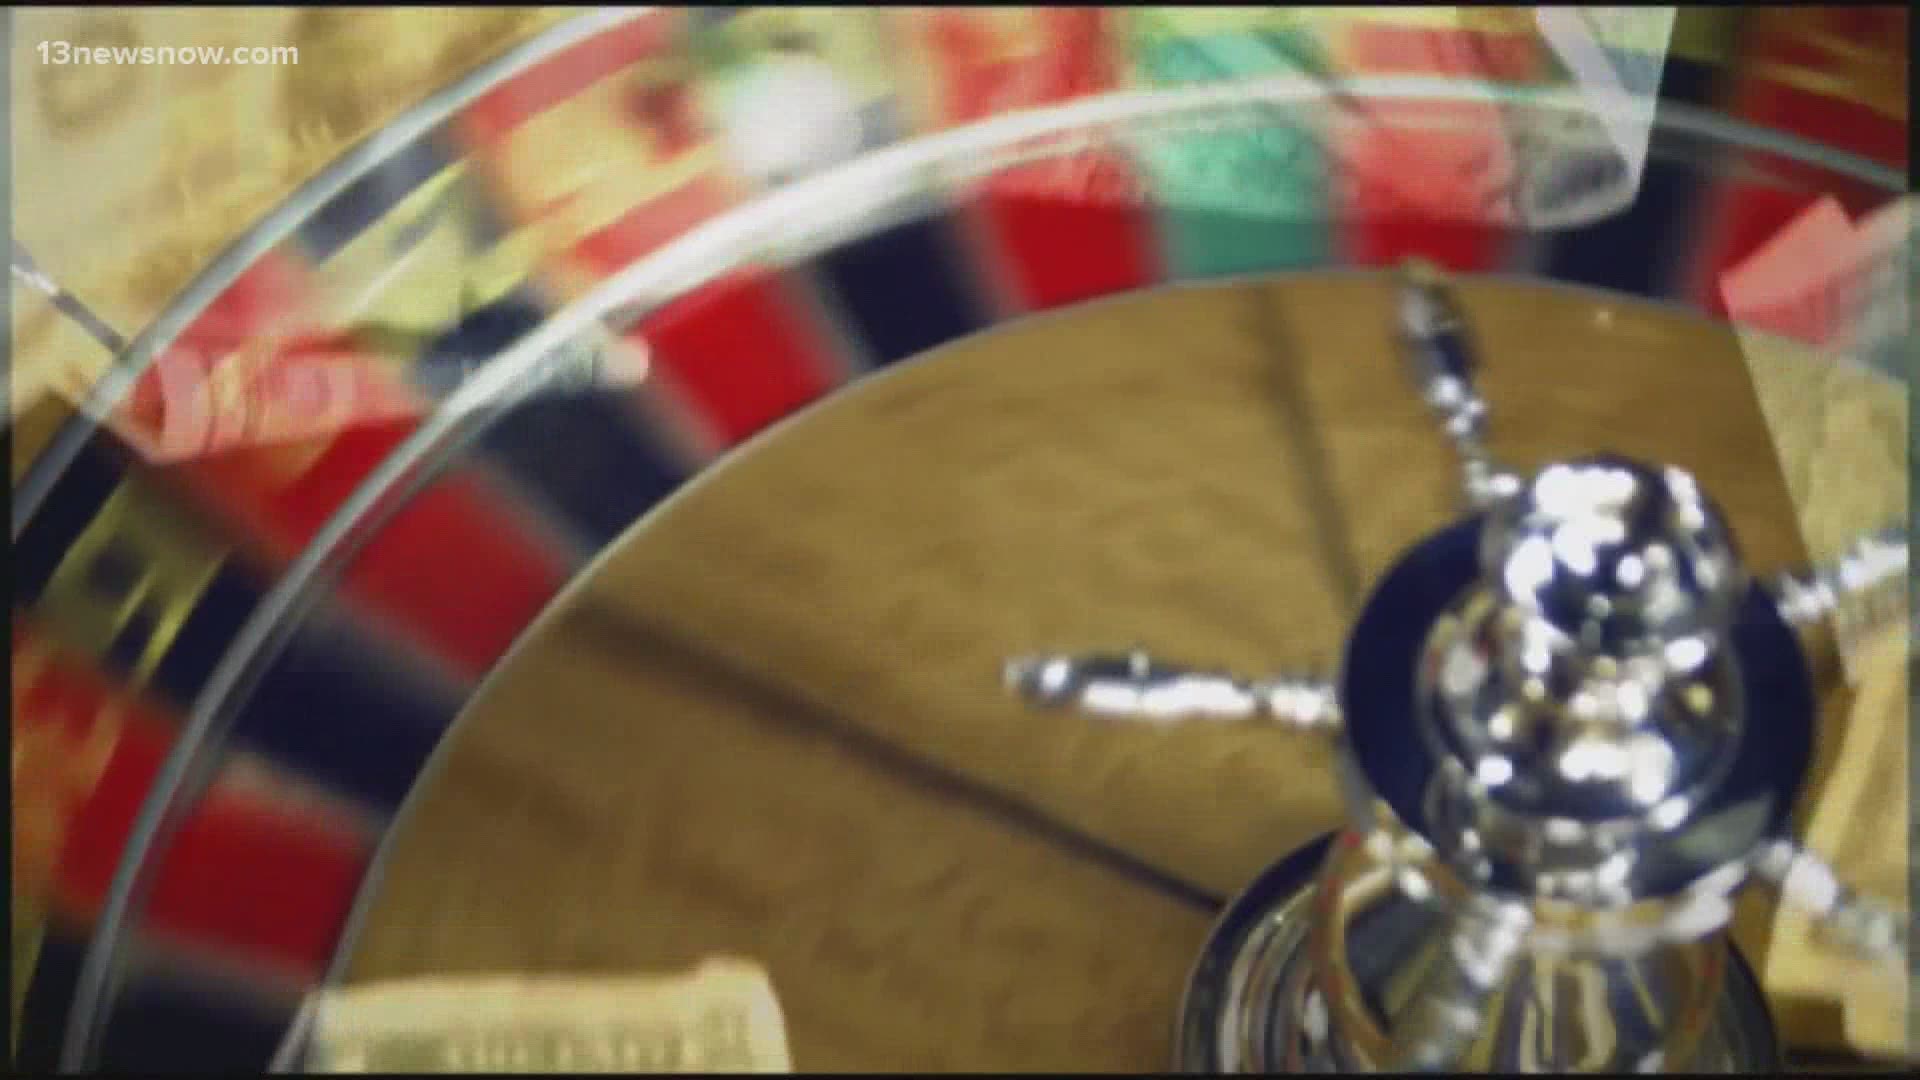 Voters in Portsmouth and Norfolk will decide on Election Day whether they want casinos in their cities.